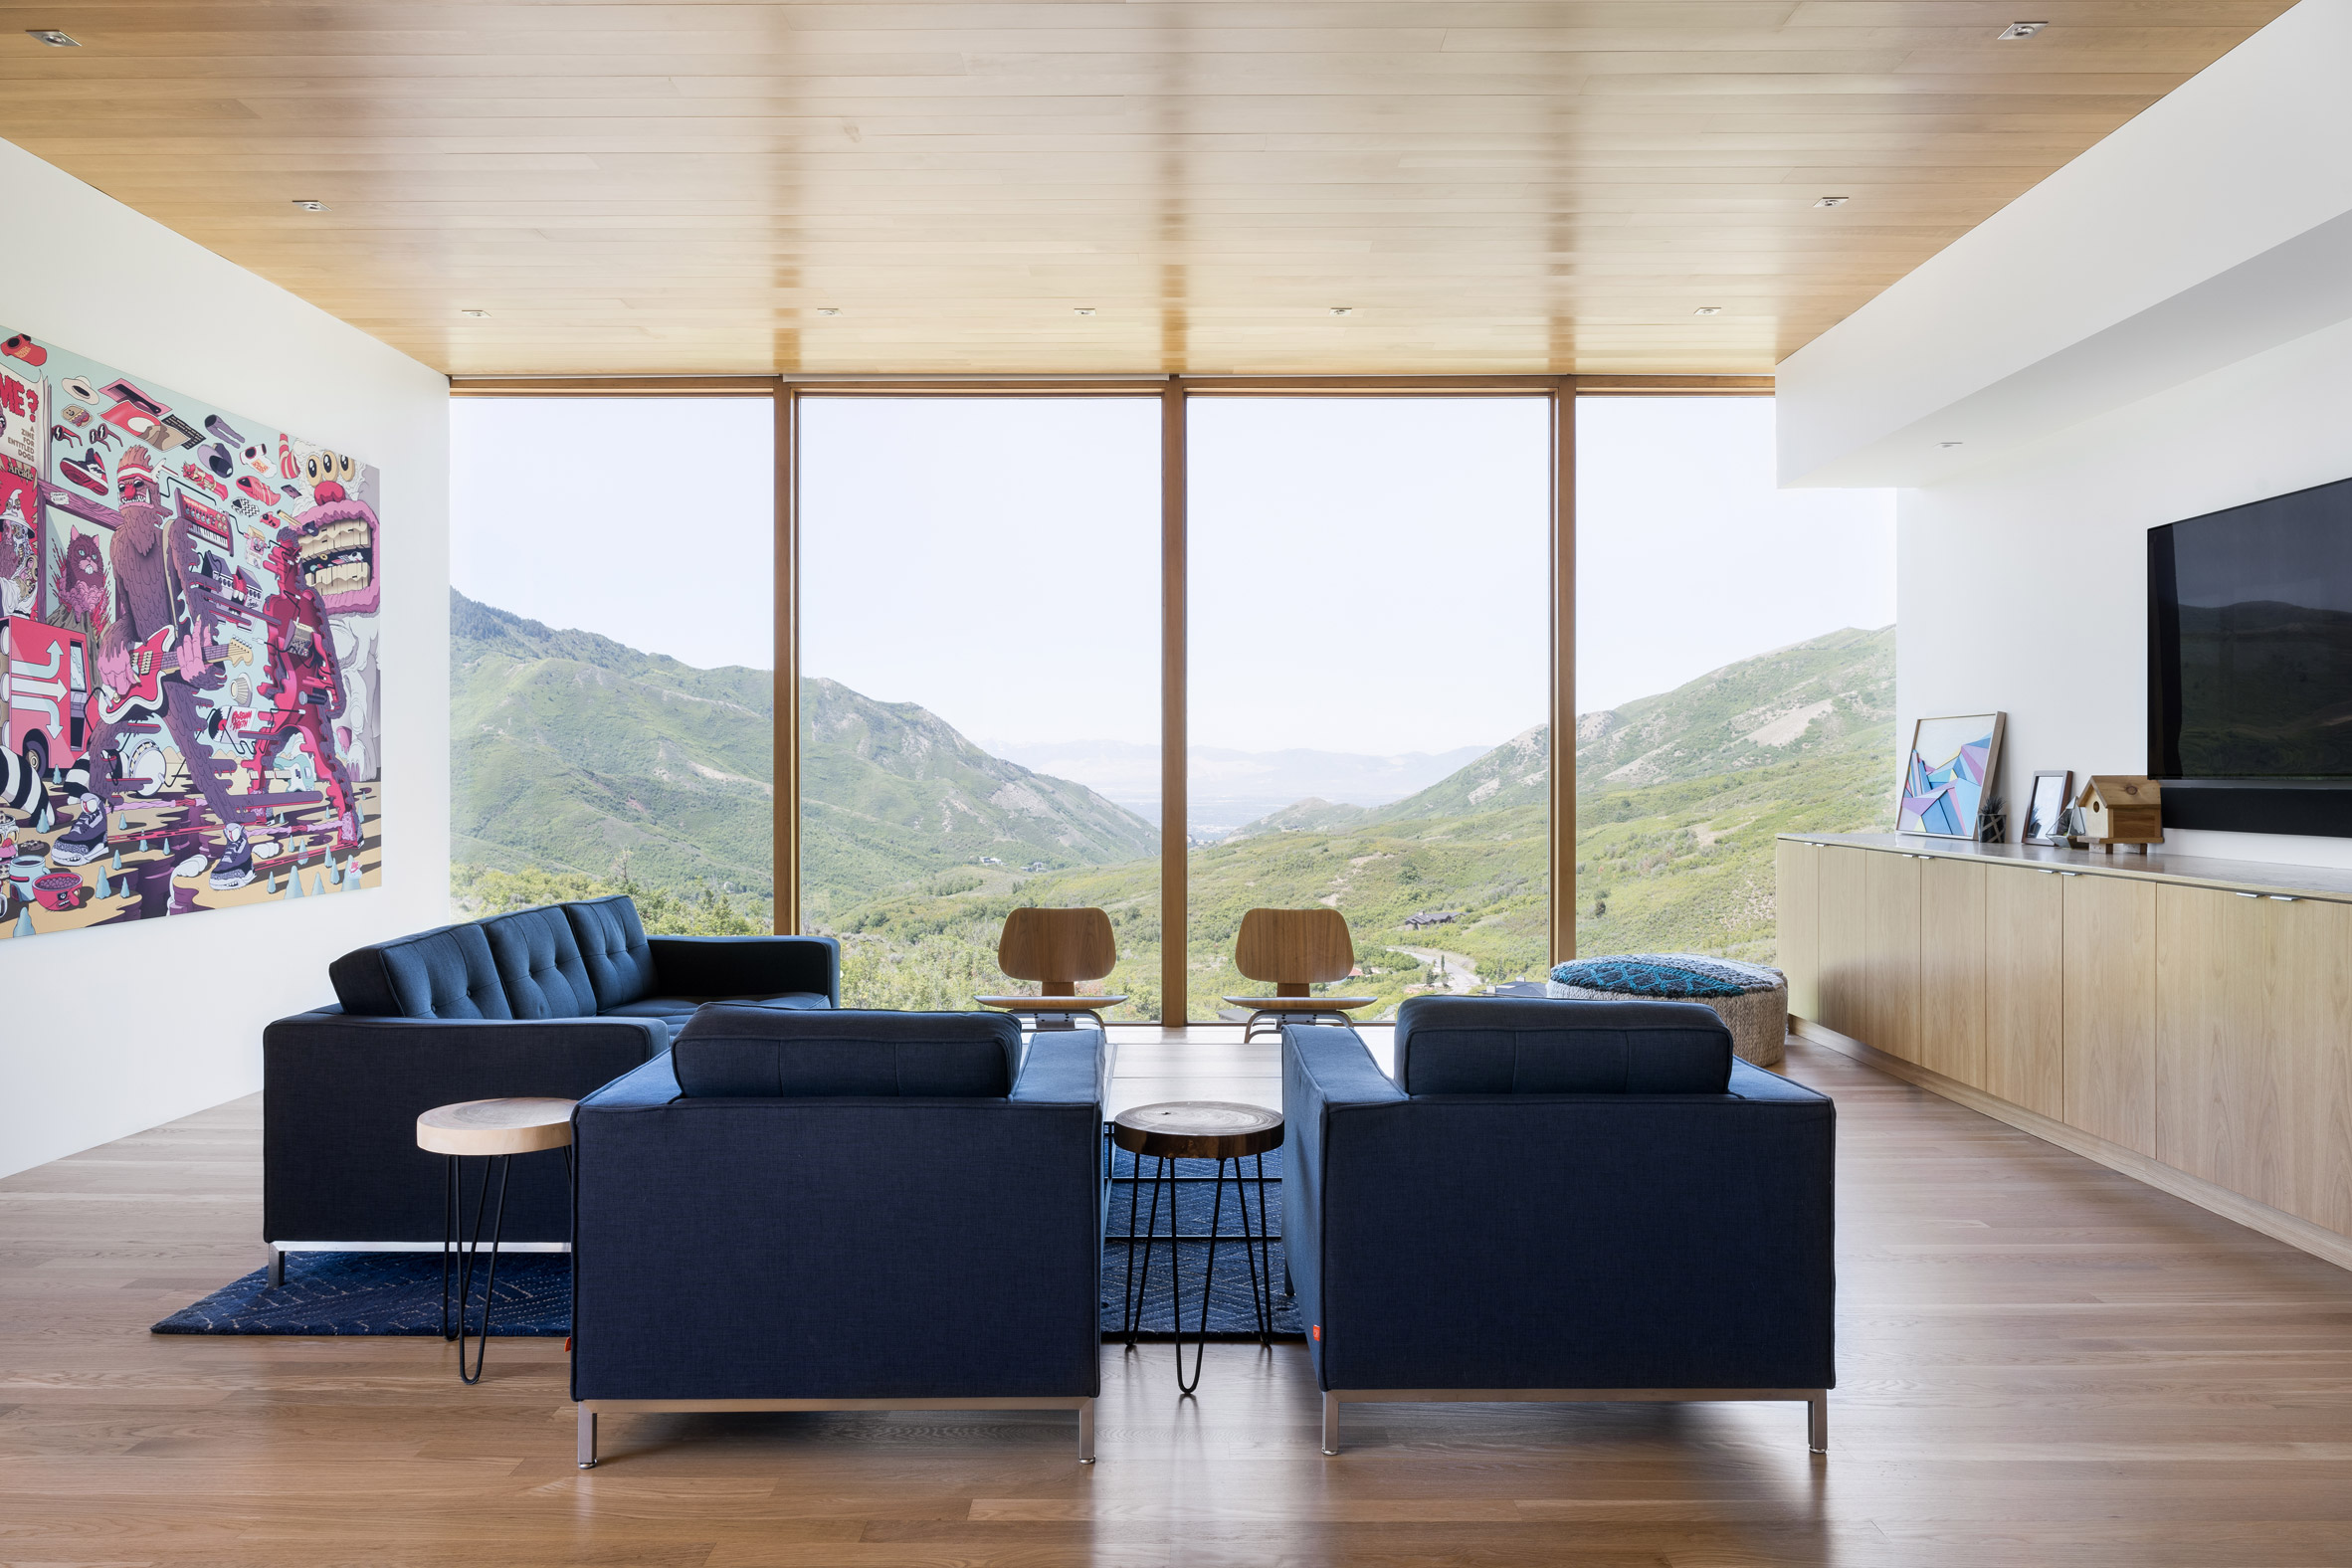 Interior living room of home at foot of Rocky Mountains in Utah